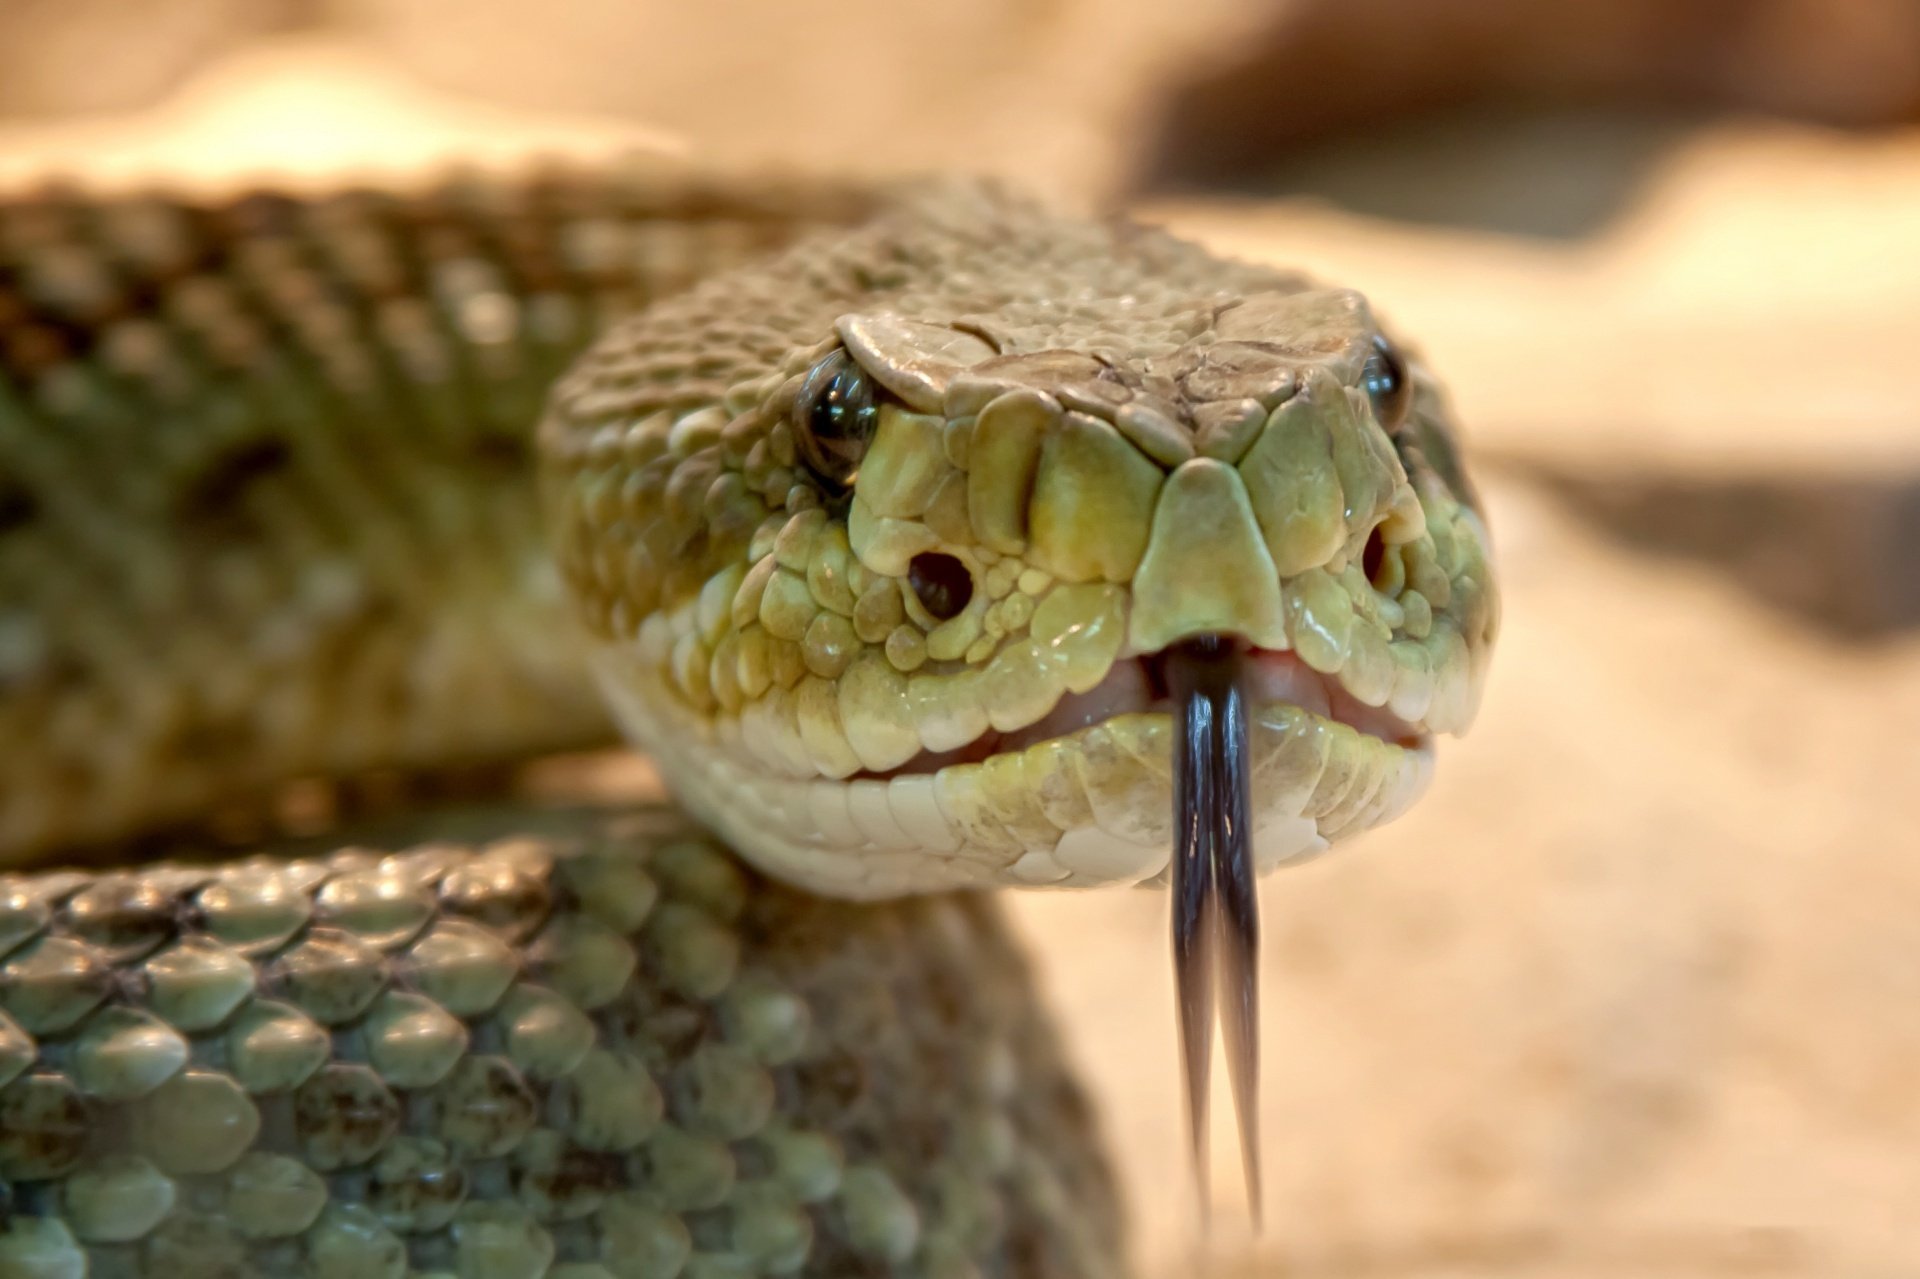 Close up of a rattlesnake with black tongue hanging out